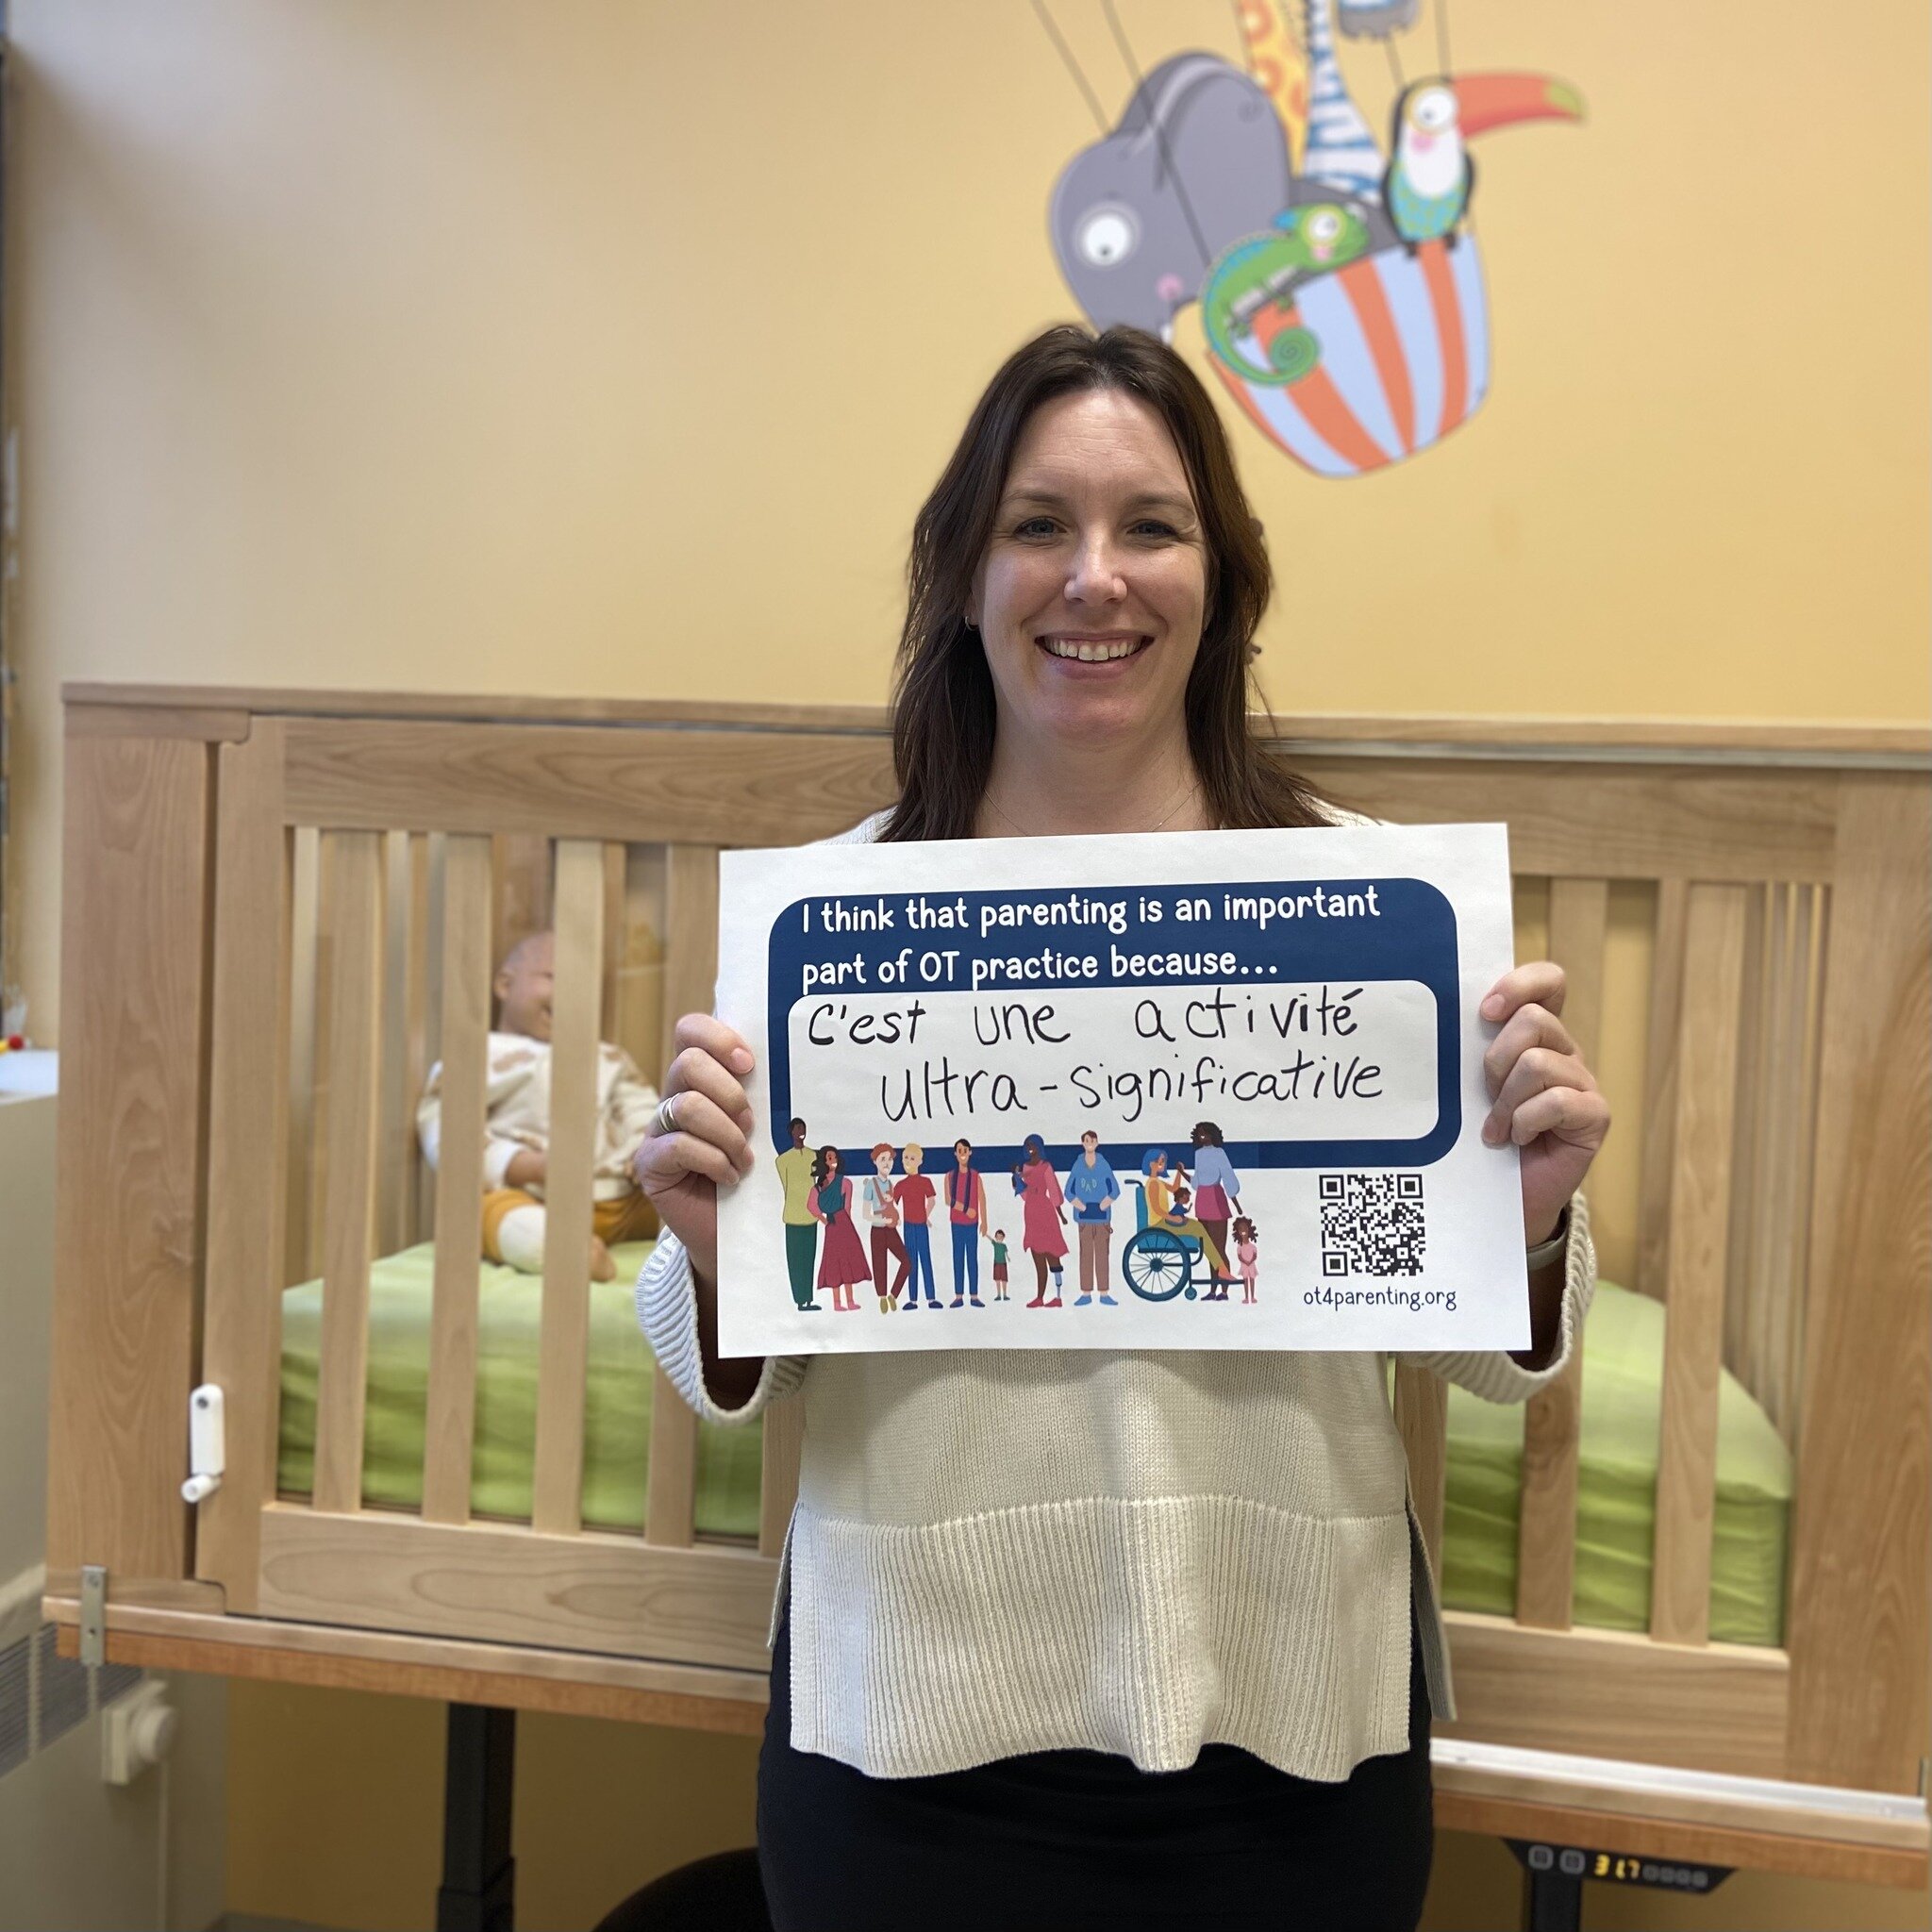 V&eacute;ronique is an OT and clinical coordinator at the Parents Plus Clinic of the Centre de r&eacute;adaptation en d&eacute;ficience physique Lucie-Bruneau and she thinks that parenting is an important part of OT practice because... &quot;it's an 